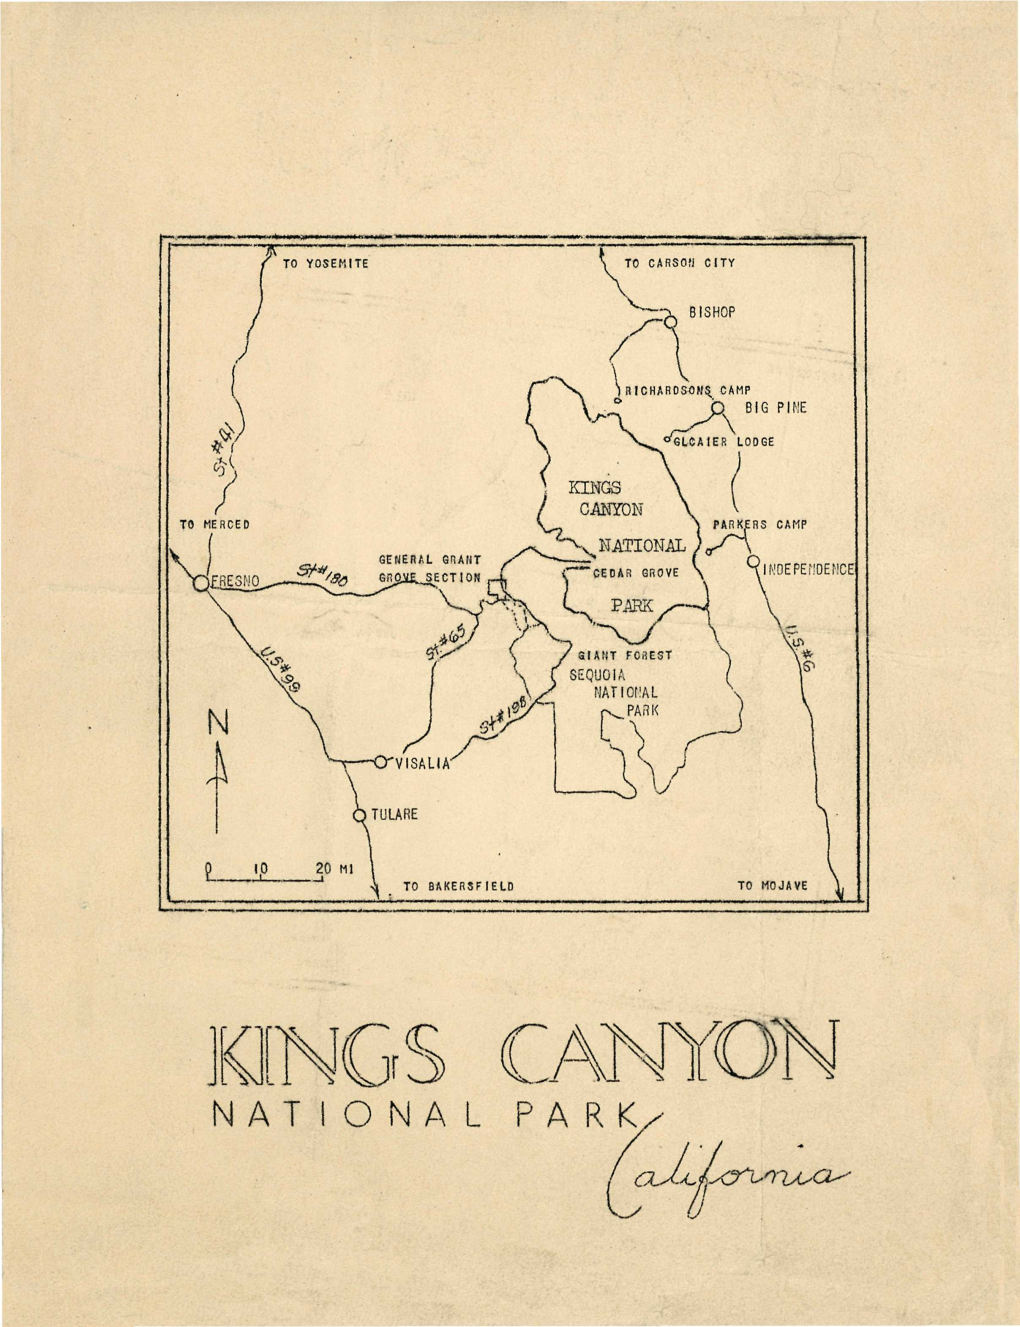 JONGS CANYON NATIONAL PARK/ /If UNITED STATES KINGS CANYON DEPARTTTTT of the INTERIOR NATIONAL PARK HAROLD L